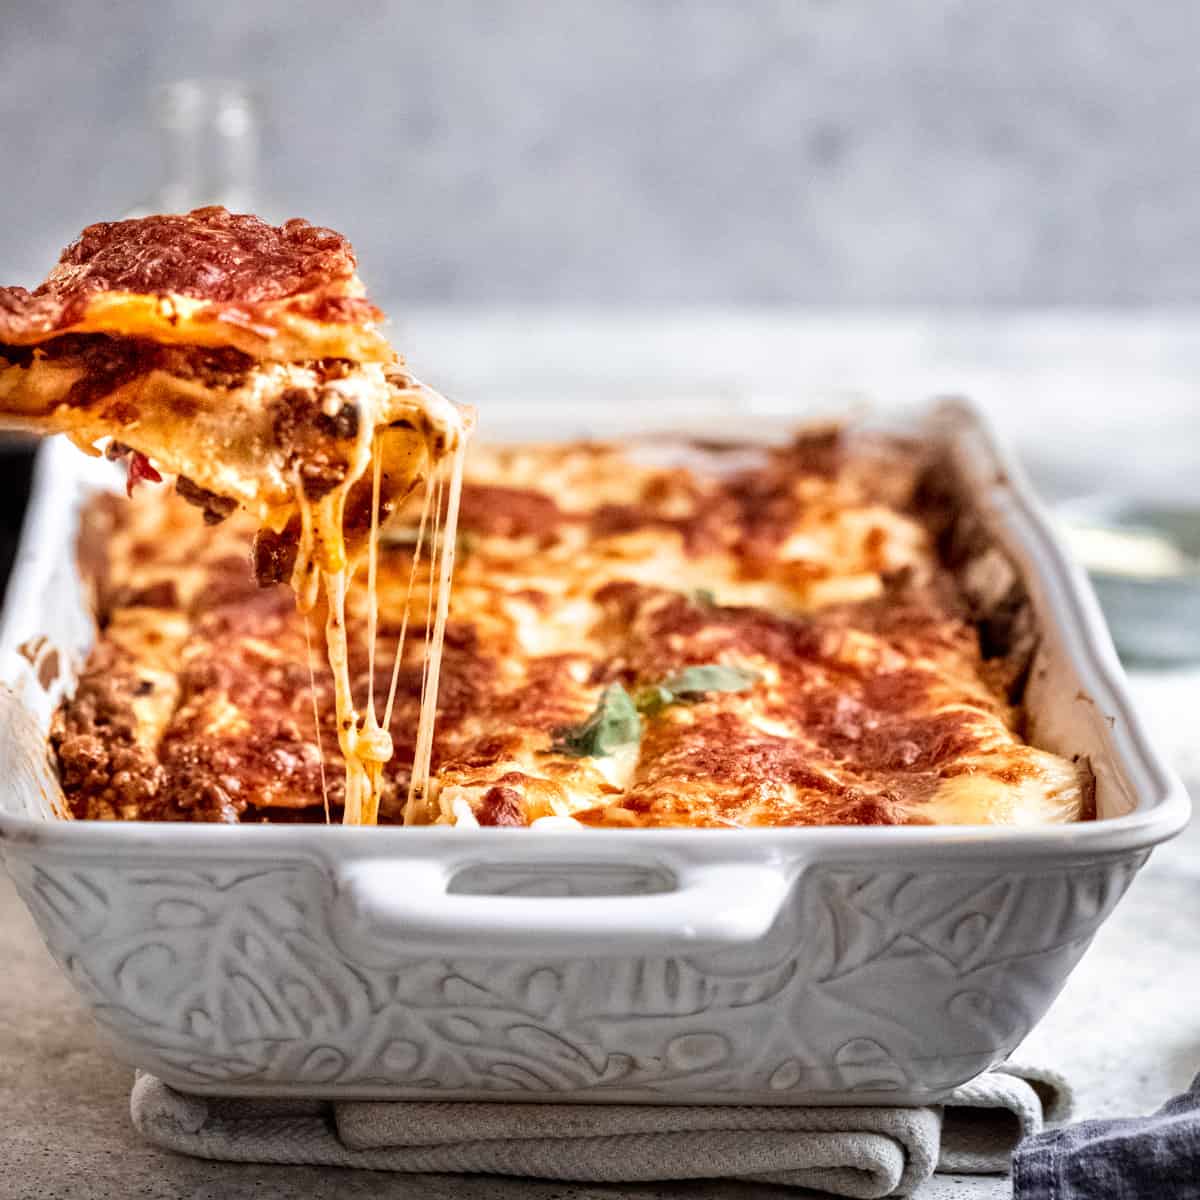 A slice of lasagna being lifted out of a pan.